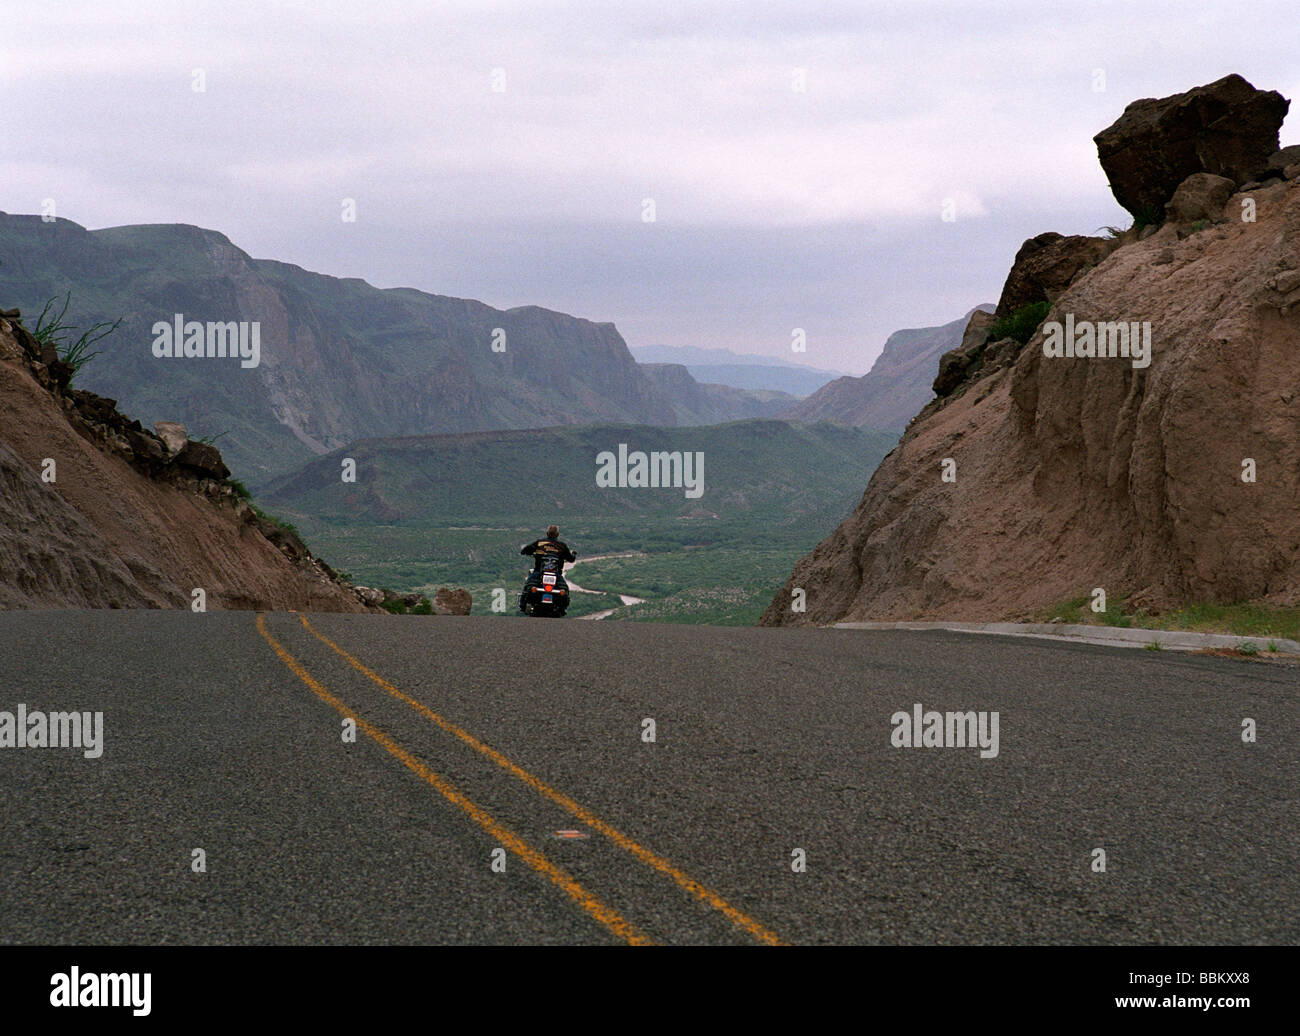 Motorcyclist in the Big Bend region of Texas Stock Photo